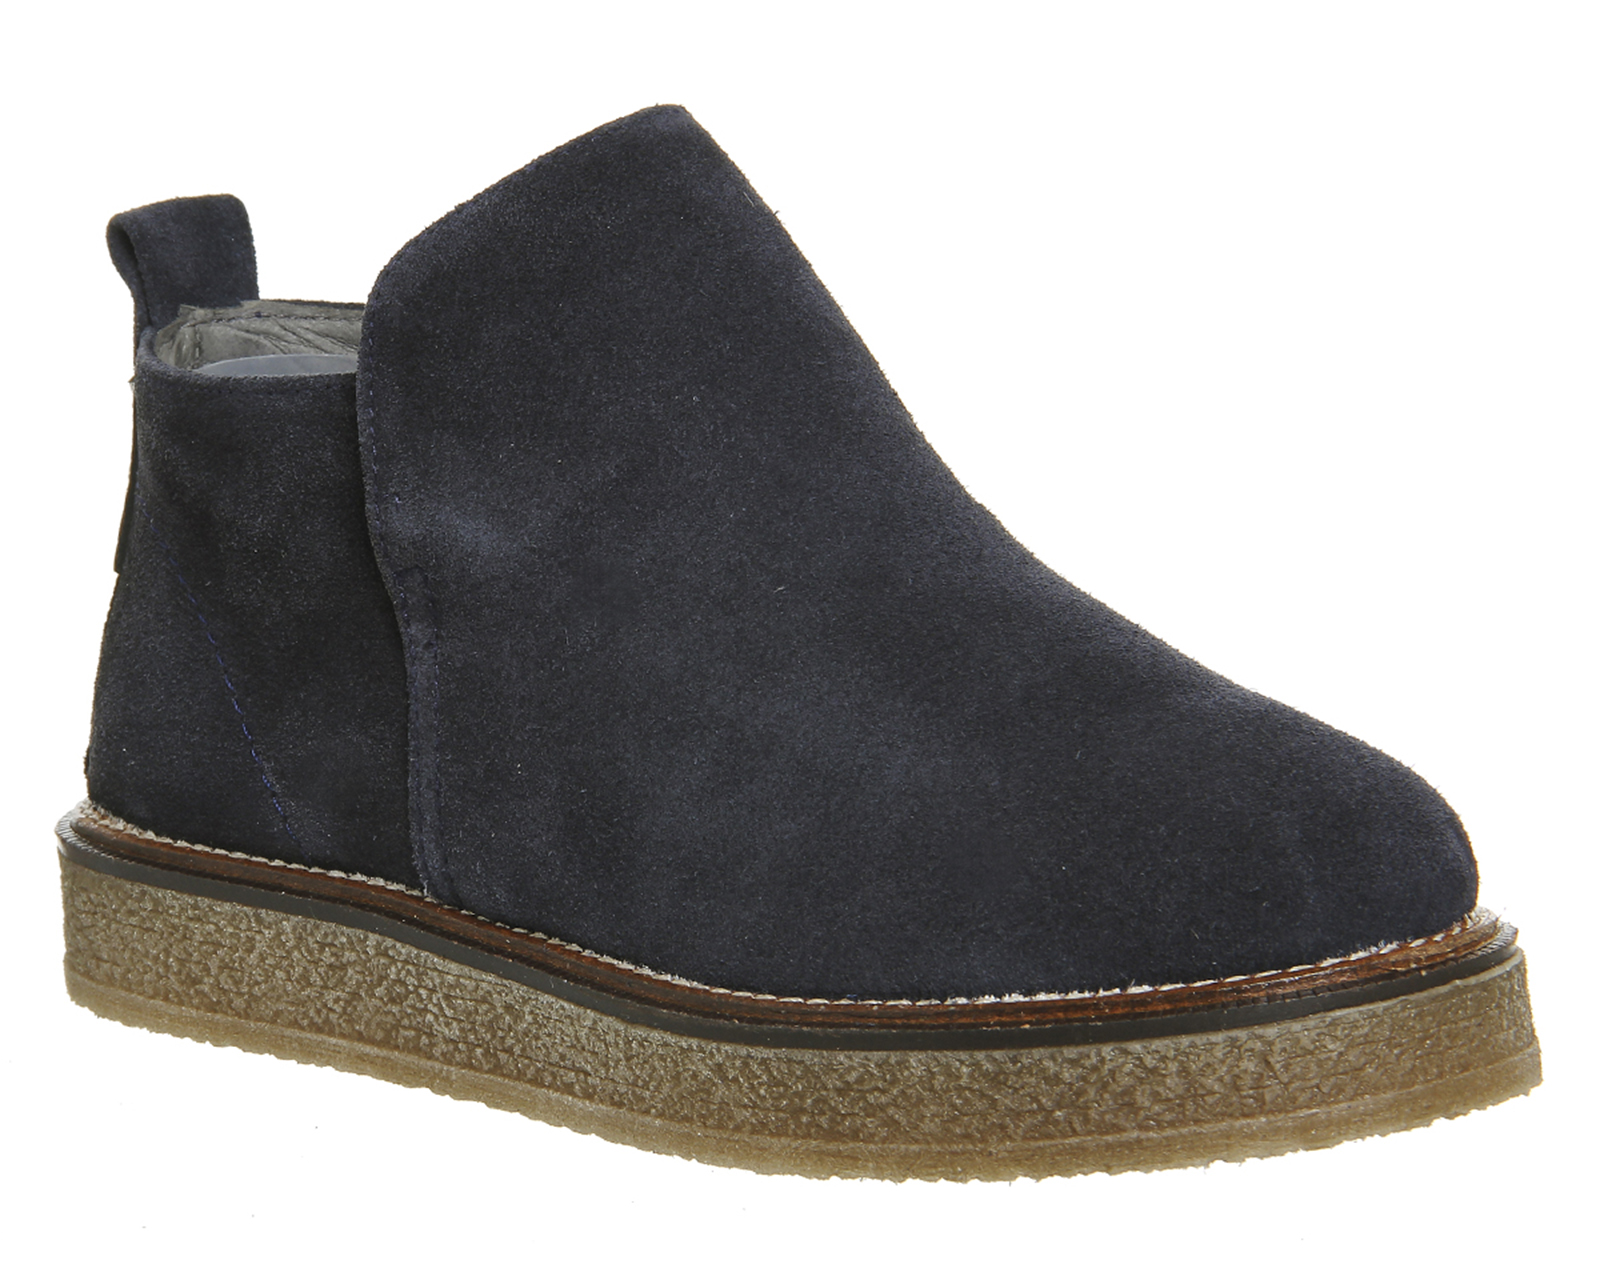 Gaimo for OFFICEAna Shearling ShoesNavy Suede